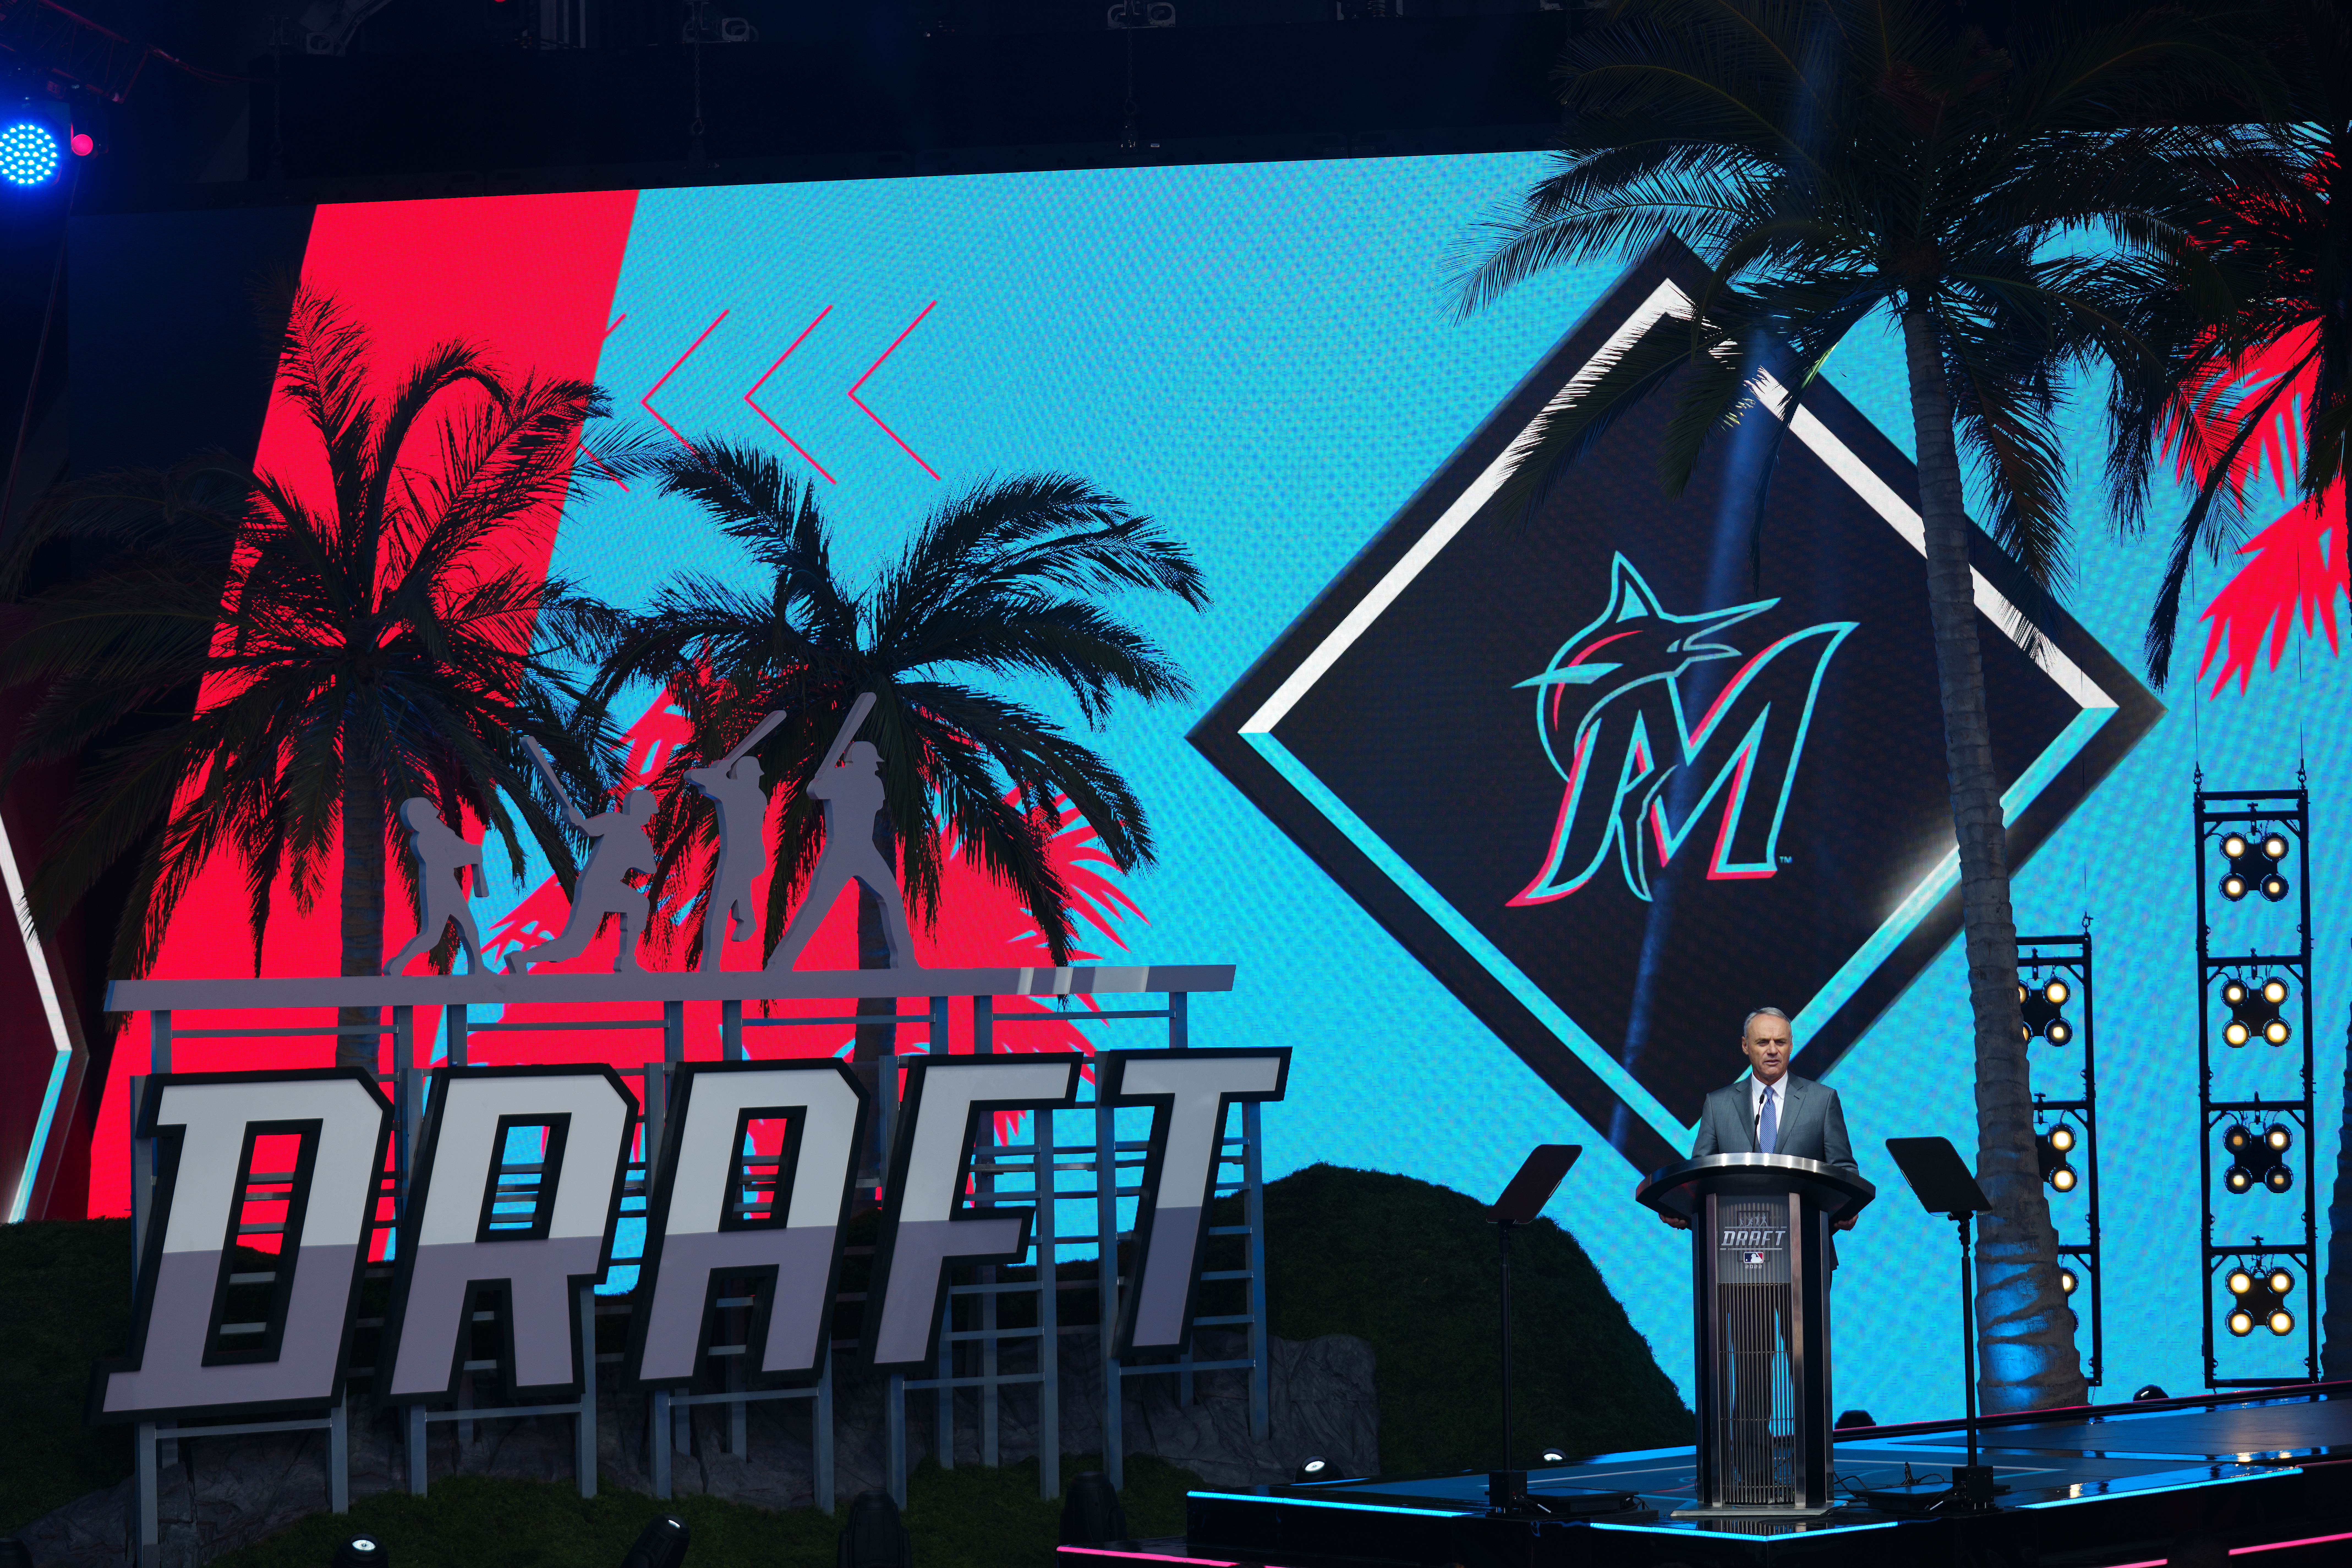 Commissioner Robert D. Manfred announces the sixth pick overall for the Miami Marlins during the 2022 Major League Baseball Draft at L.A. Live on Sunday, July 17, 2022 in Los Angeles, California.